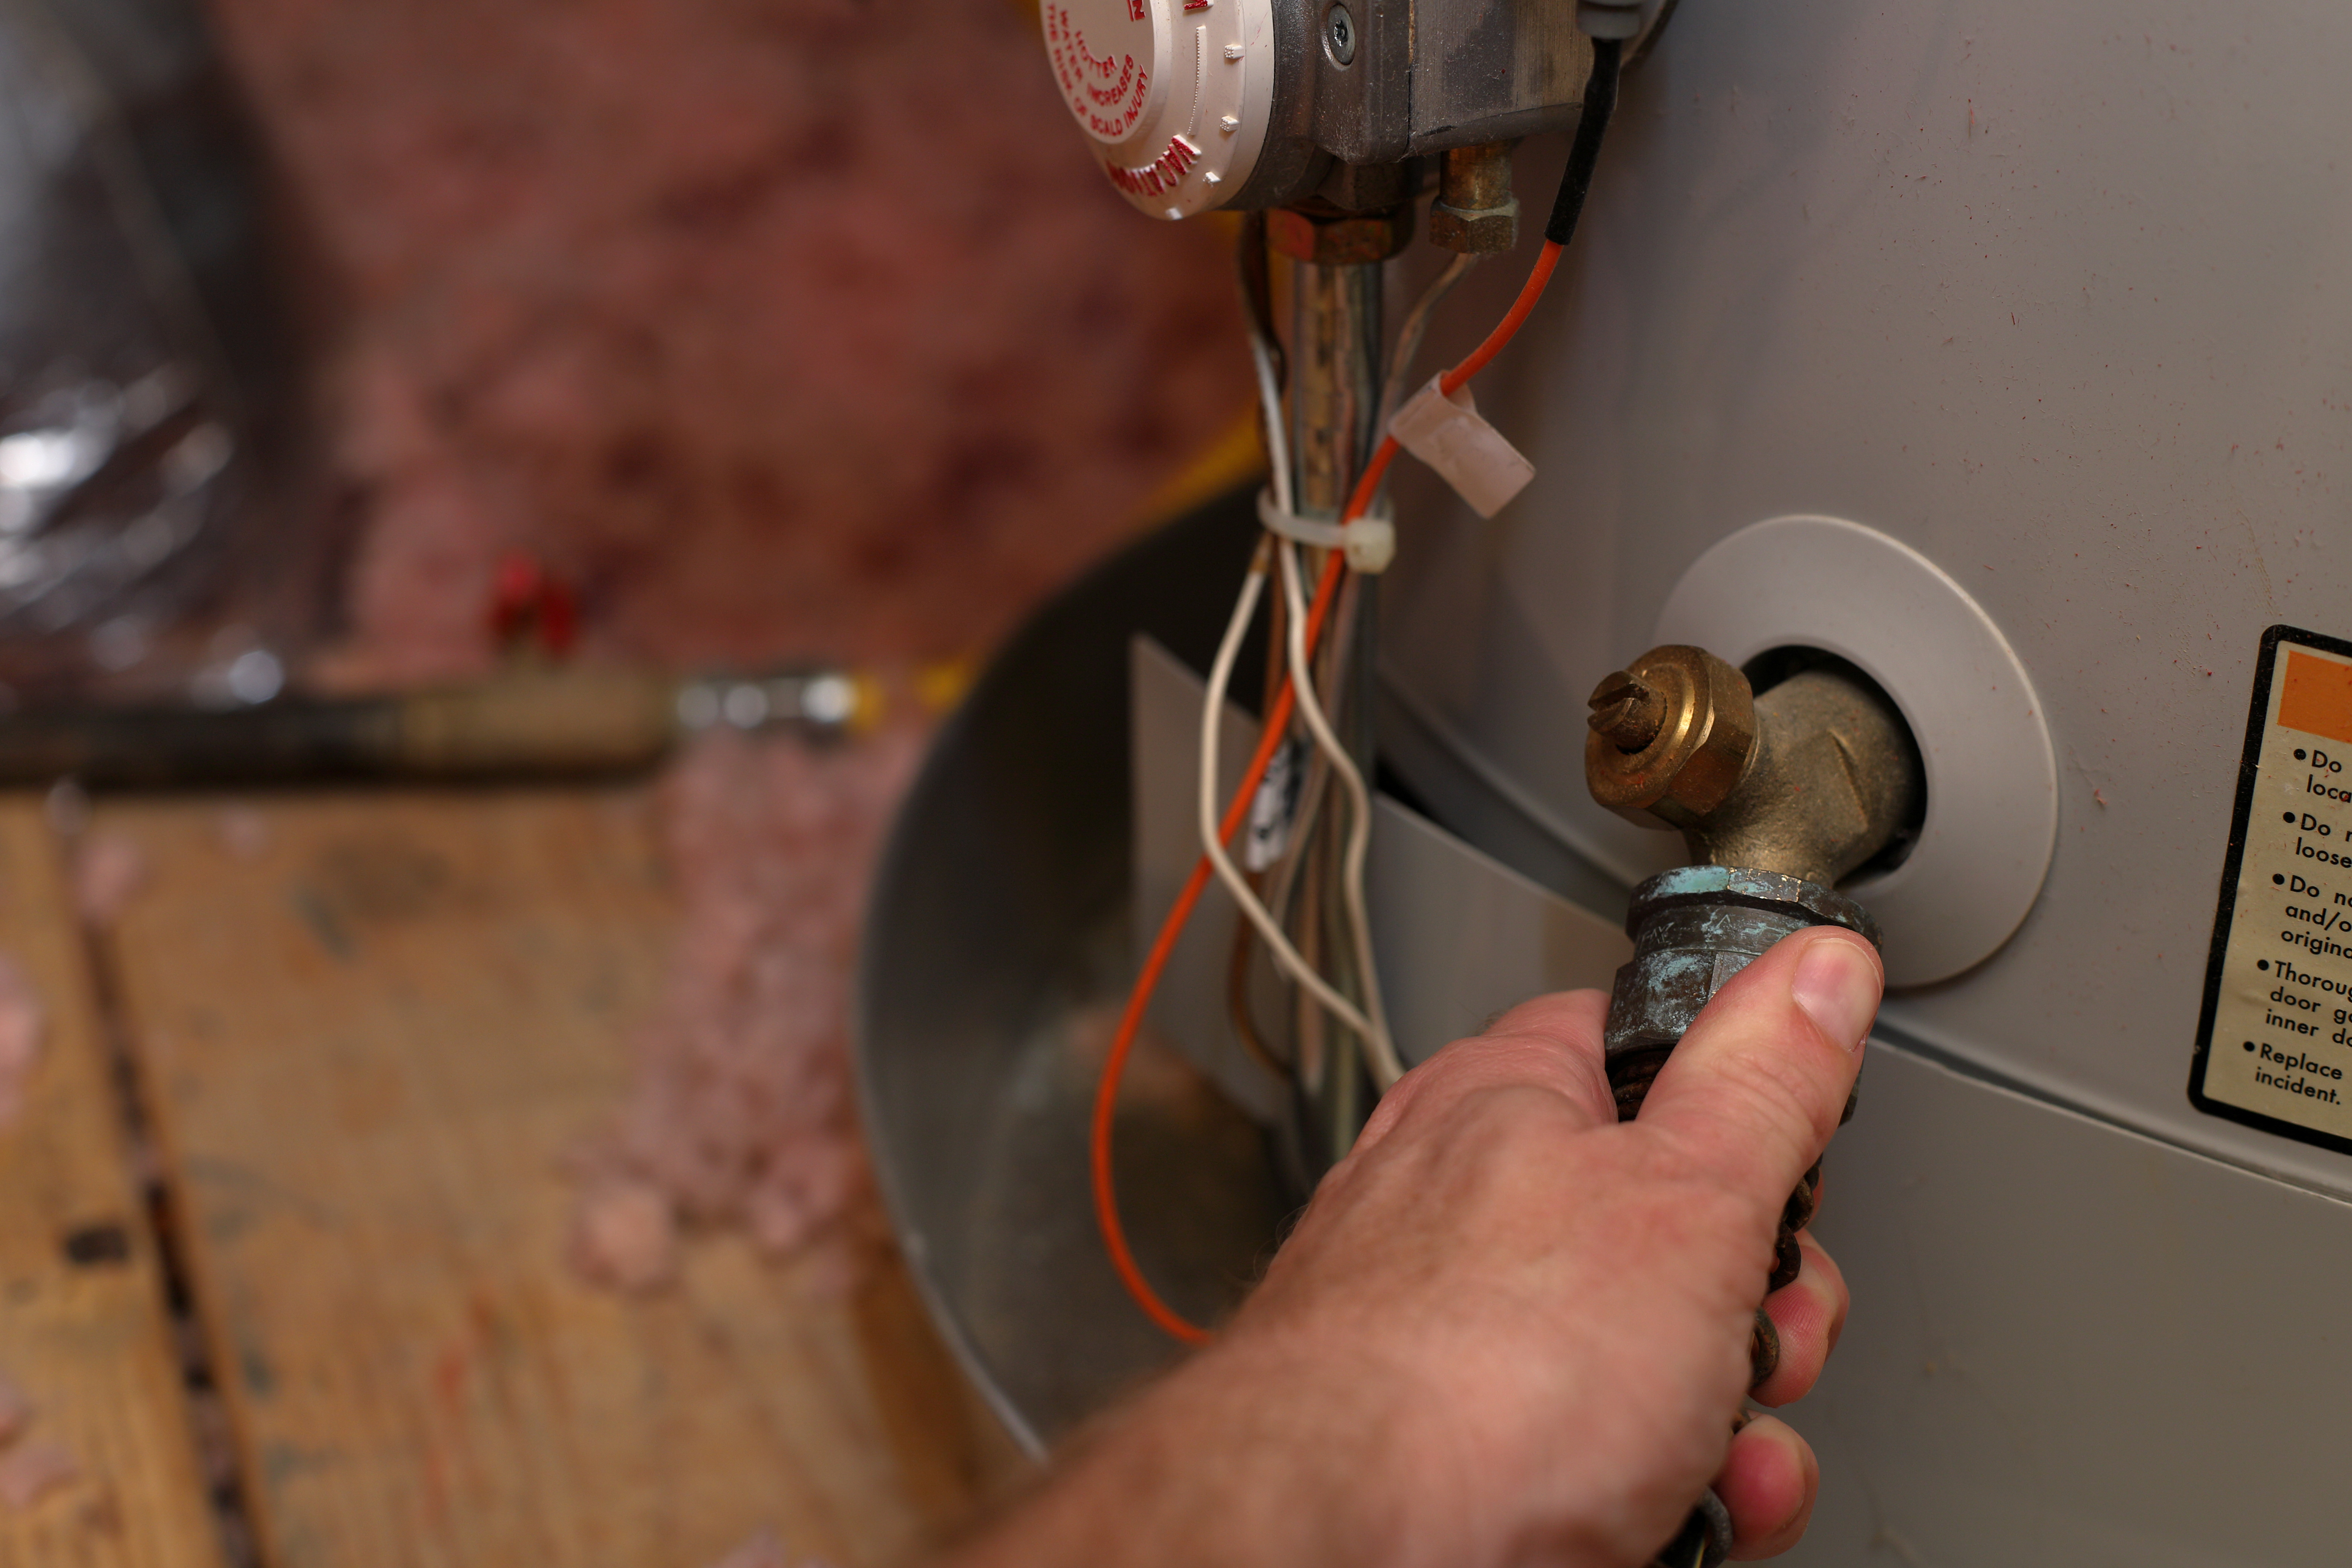 A Troubleshooting Guide for Common Problems With Air Conditioners, Heaters, and Water Heaters